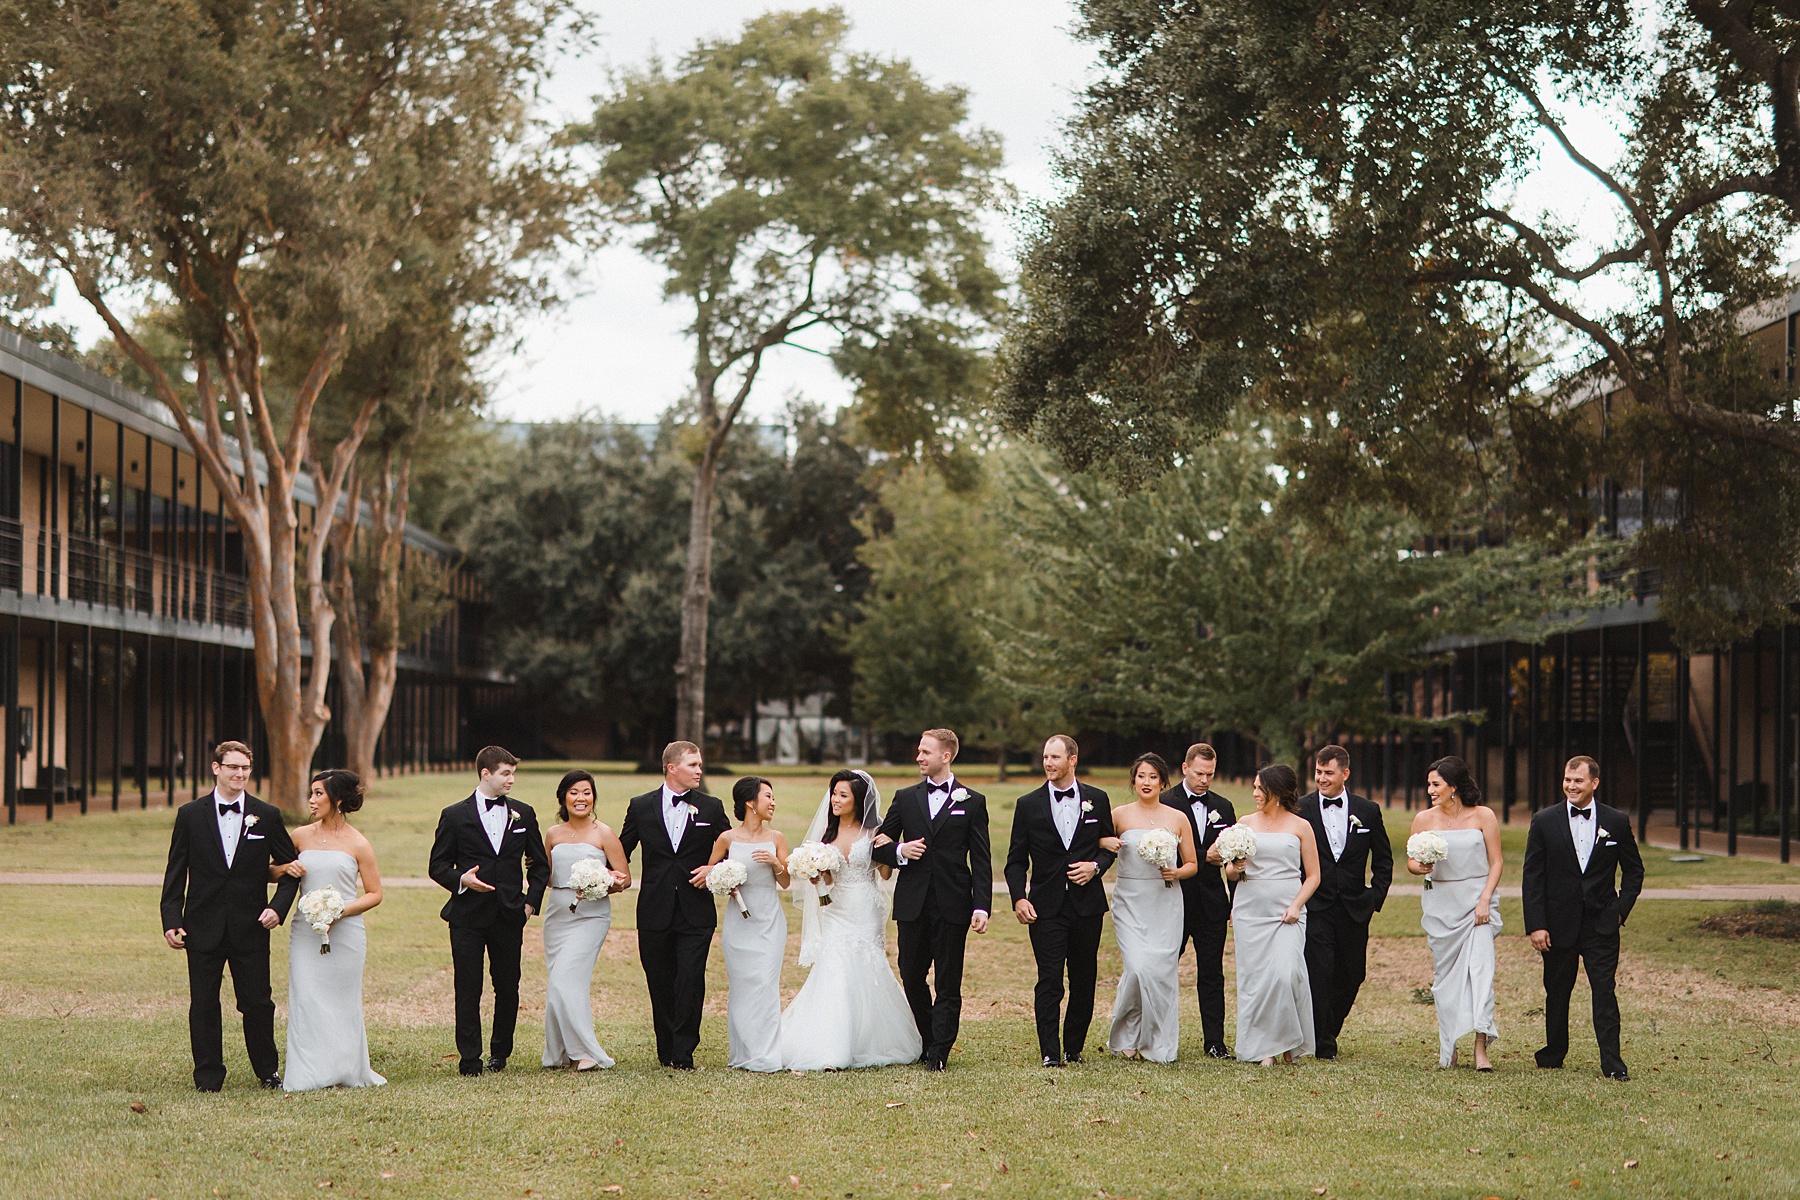 Group picture of the entire bridal party after the wedding ceremony 